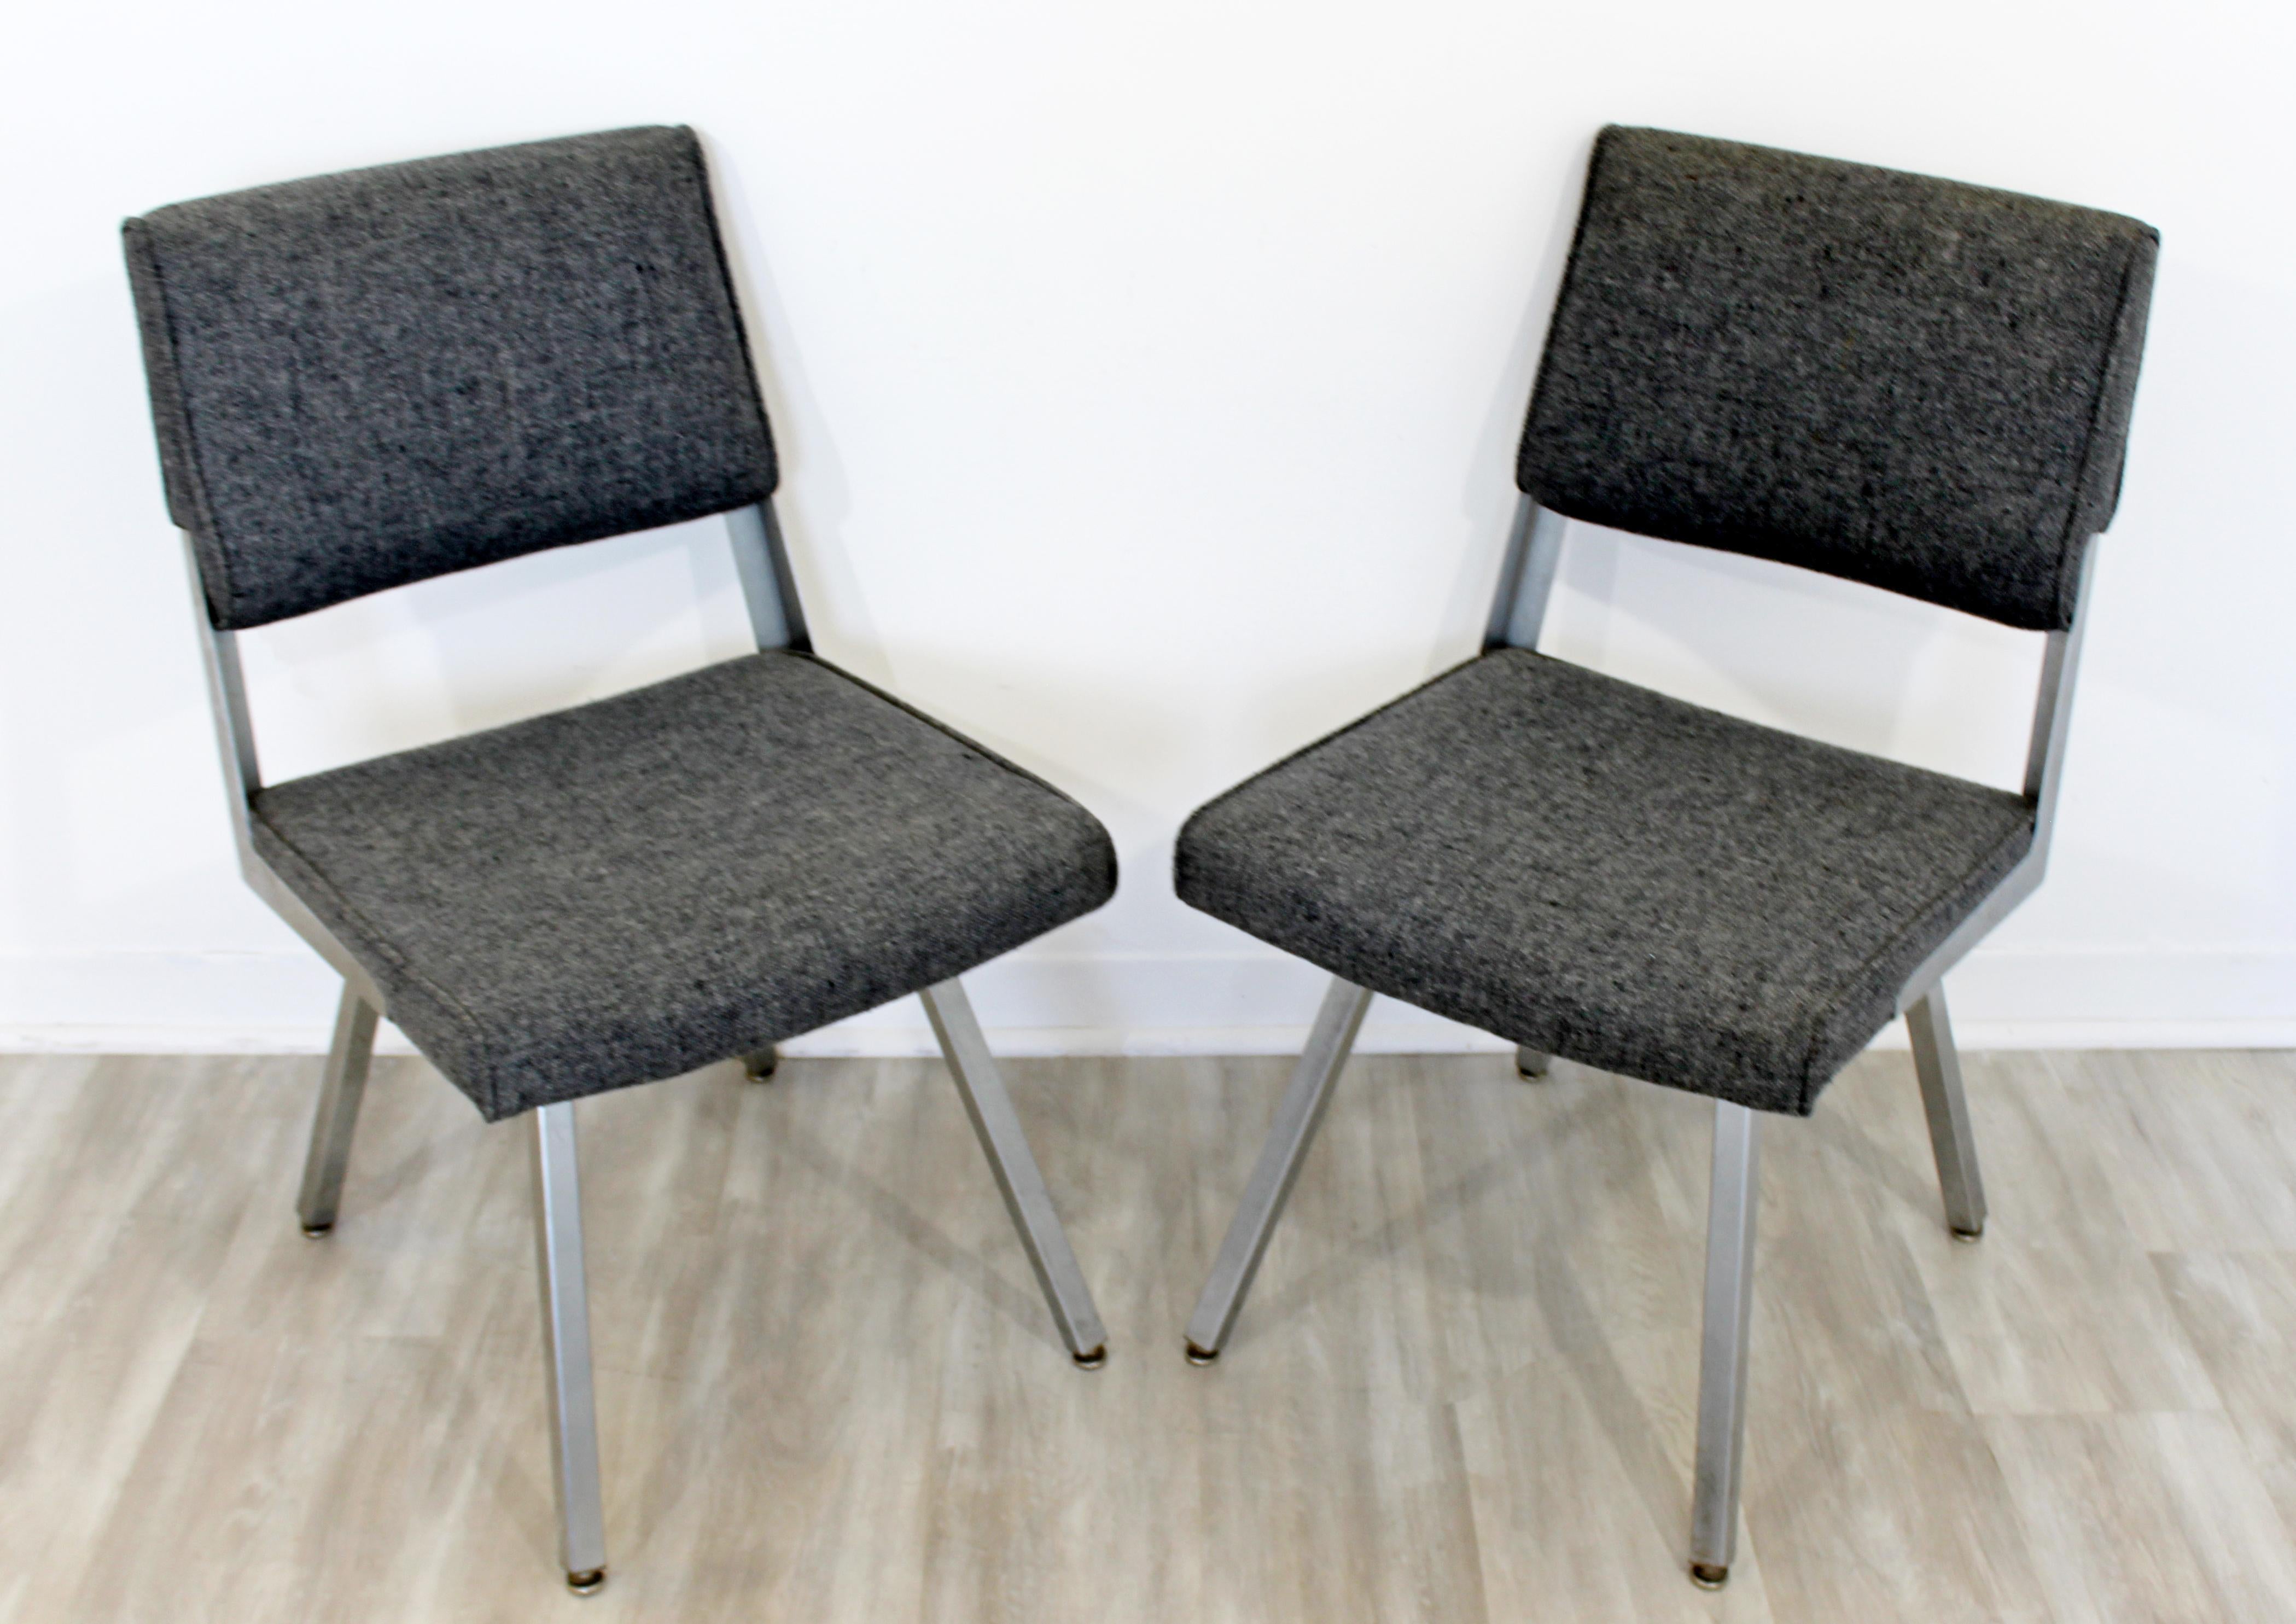 For your consideration is a fantastic pair of gray office or accent chairs, on steel bases, by Harter Corporation, circa 1980s. In excellent vintage condition. The dimensions are 18.5